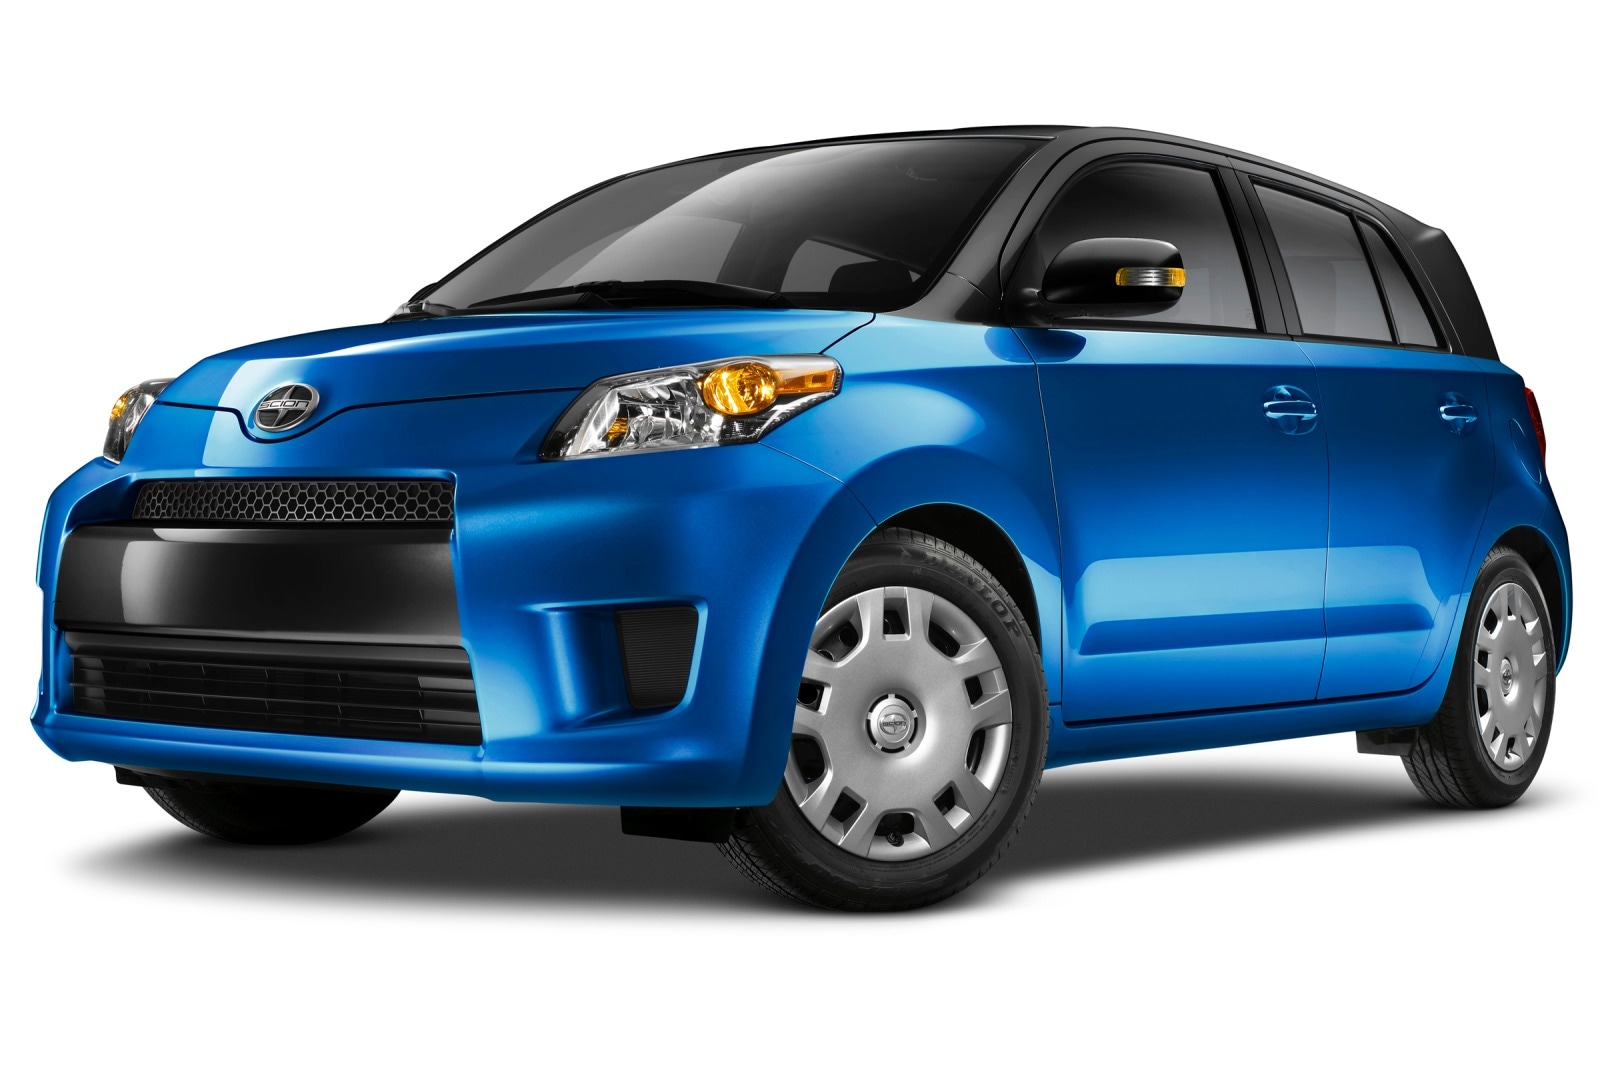 Unveiling the Pitfalls: Concerns and Grievances with the 2012 Scion xD